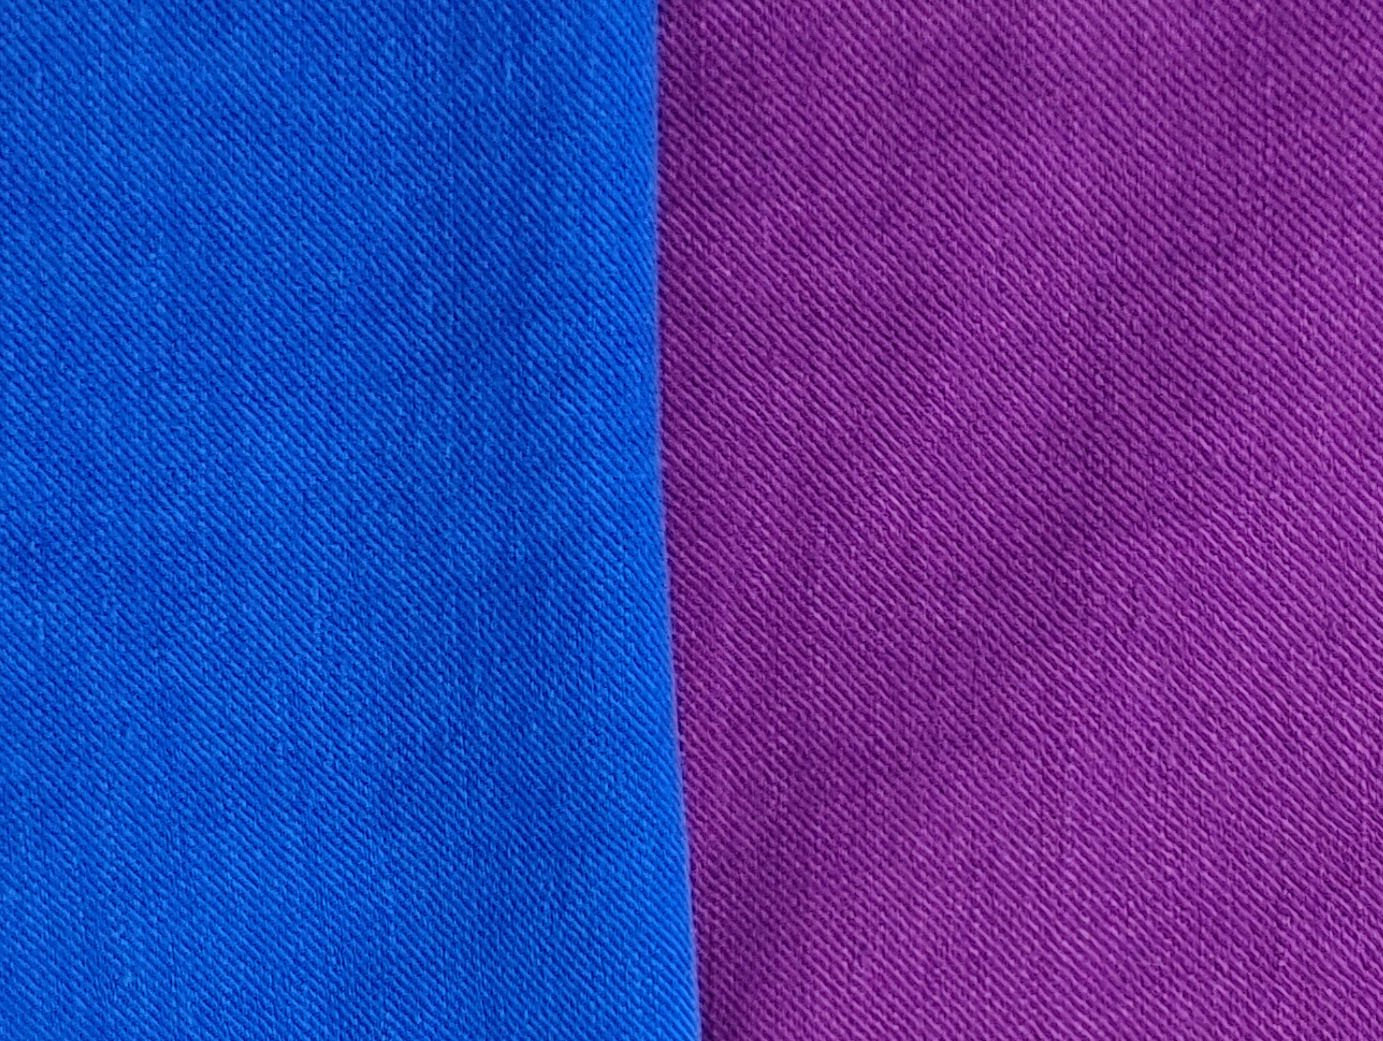 Elegance in Twill: Silky Linen Rayon Fabric with Good Drape 6032 6033 - The Linen Lab - Violet